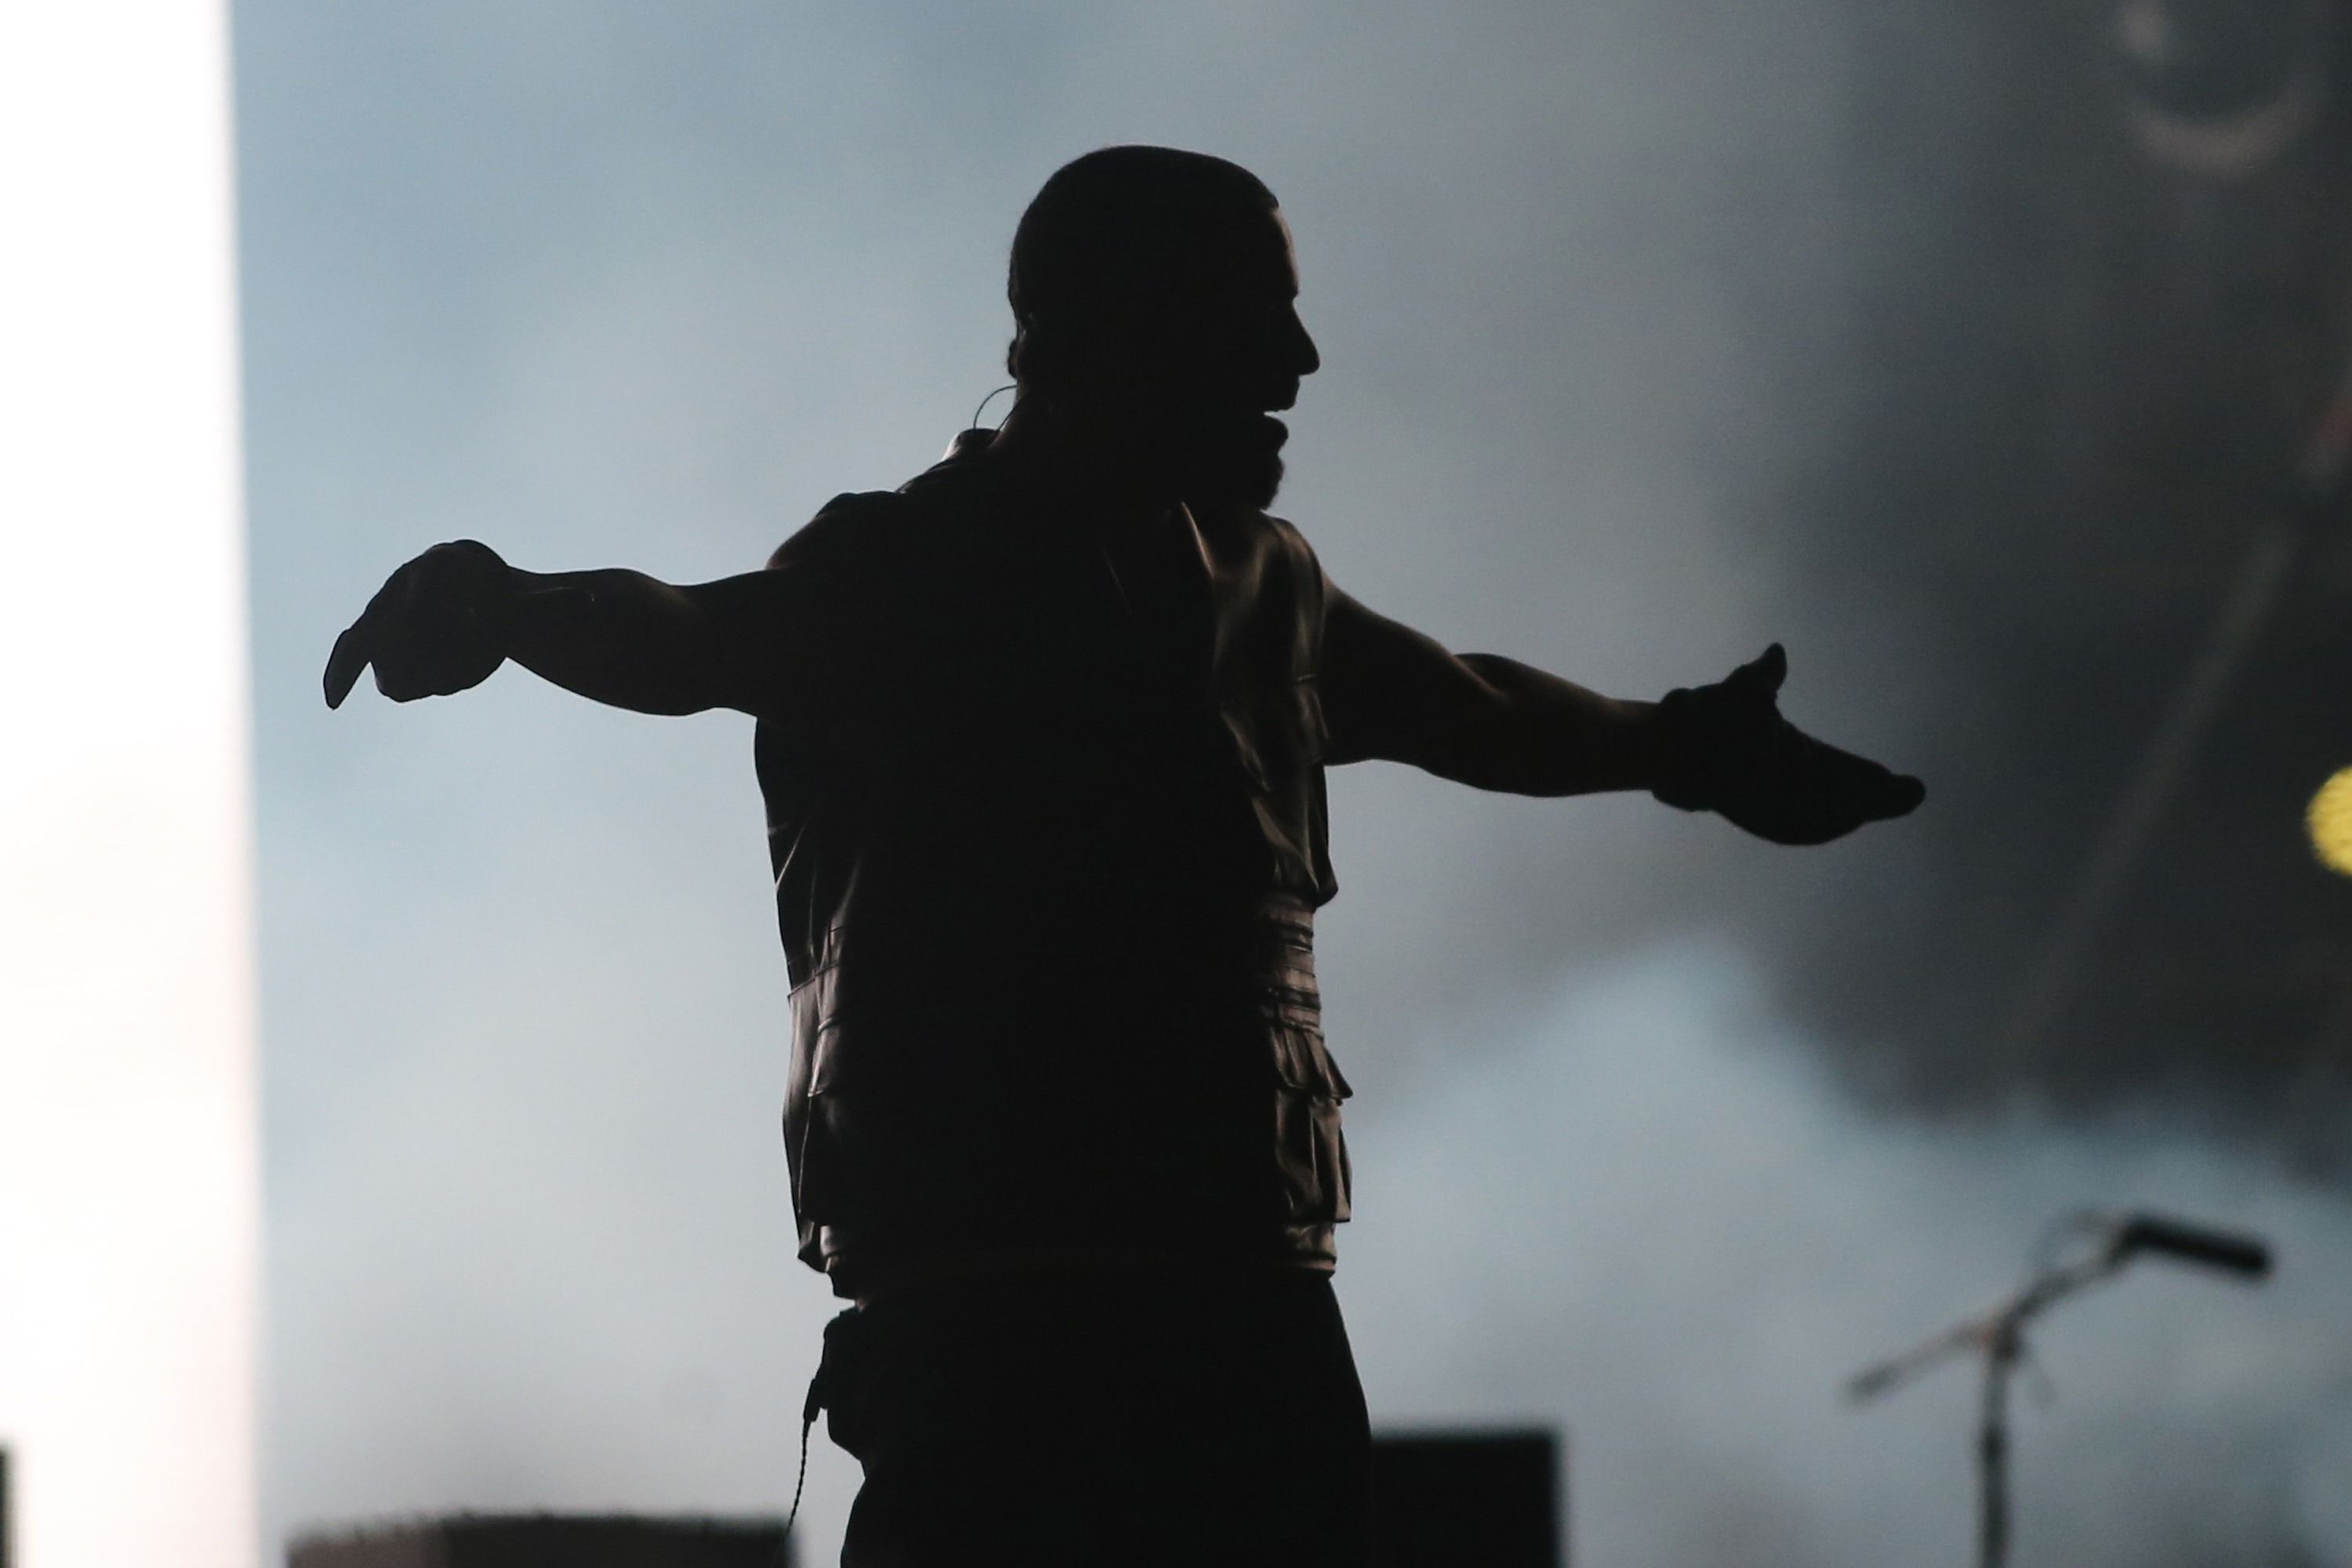 Silhouetted performer with arms extended on a concert stage, engaging with the audience